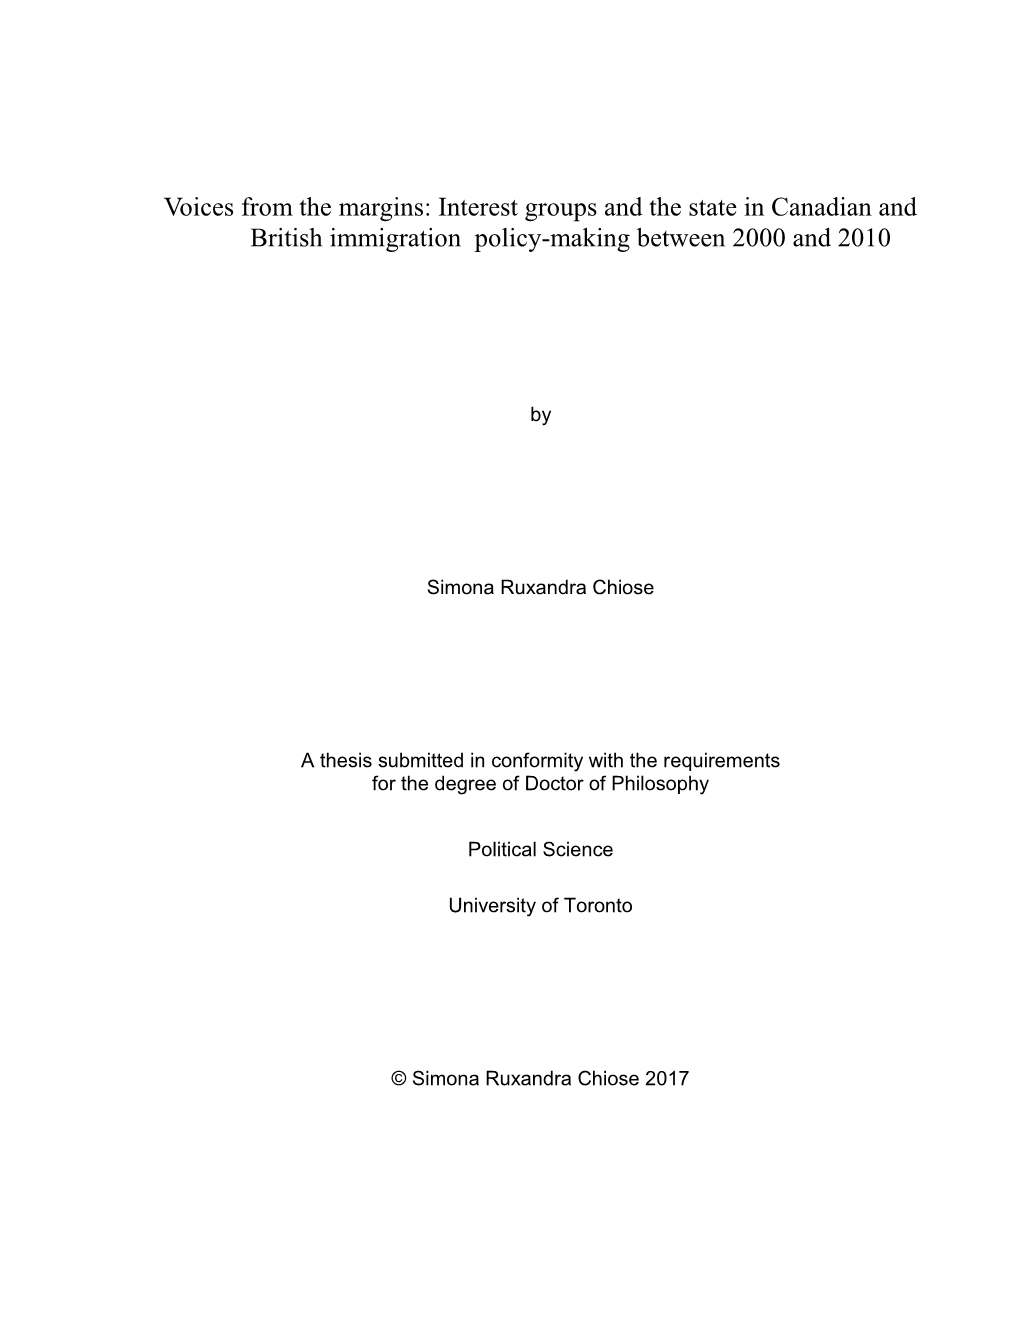 Voices from the Margins: Interest Groups and the State in Canadian and British Immigration Policy-Making Between 2000 and 2010